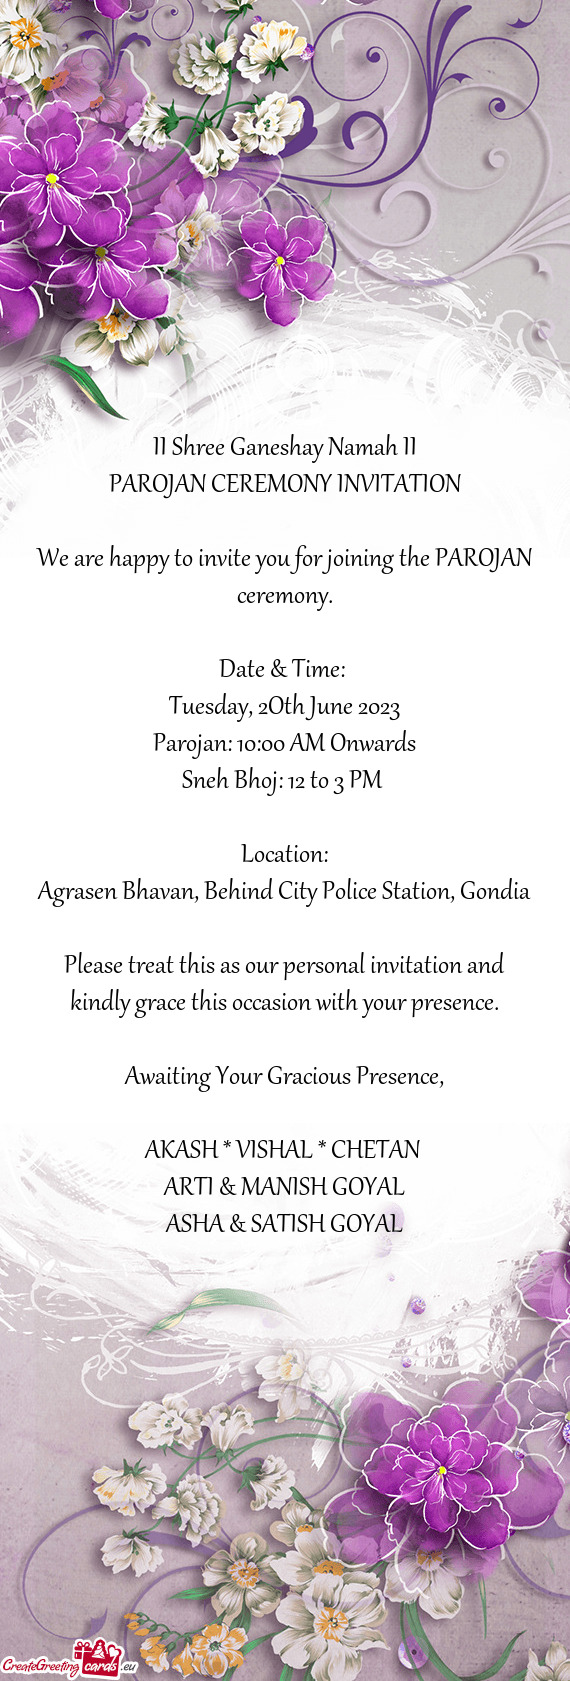 We are happy to invite you for joining the PAROJAN ceremony